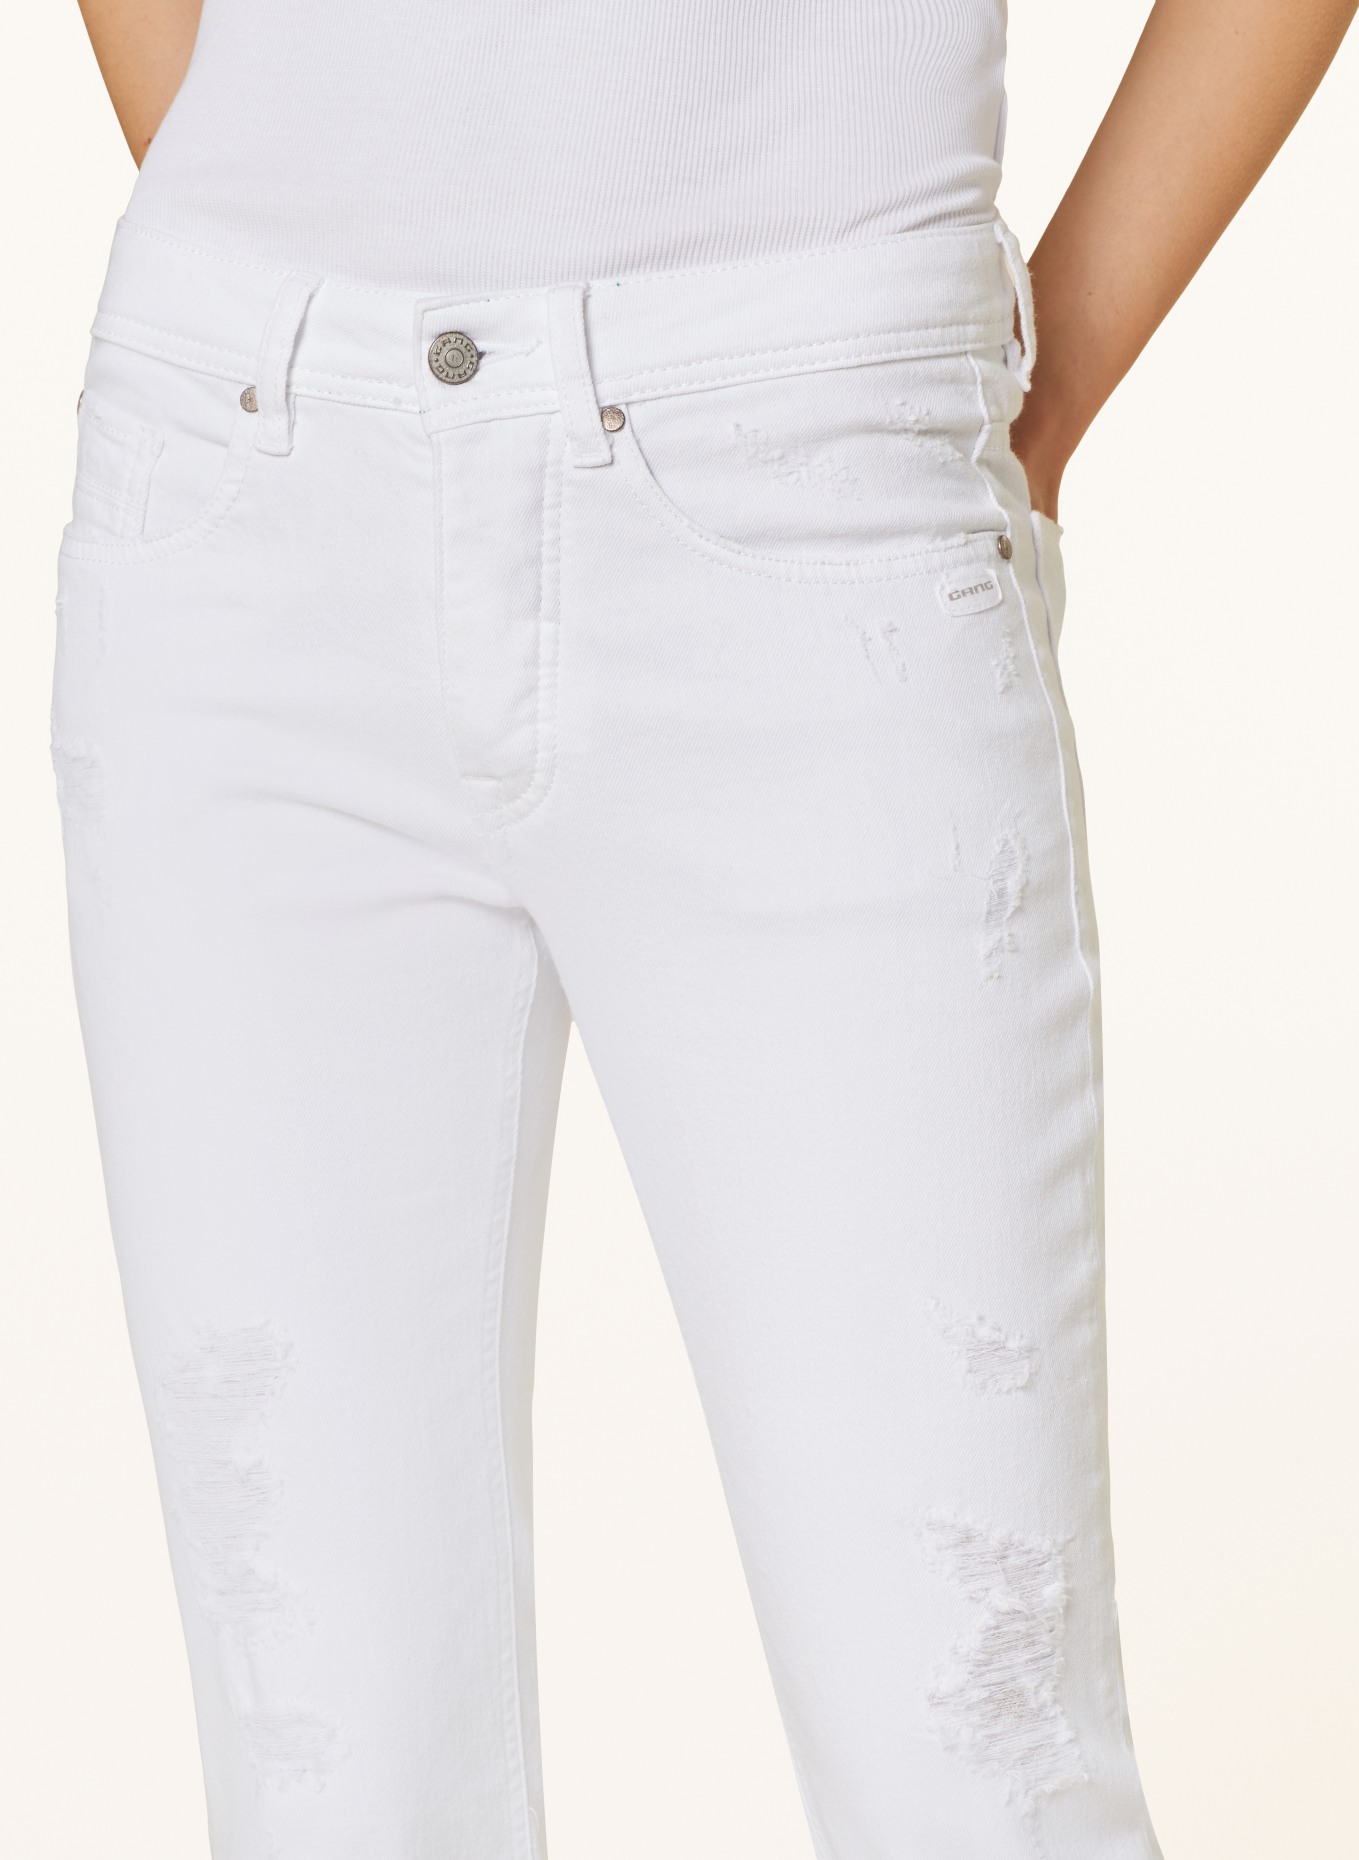 GANG 7/8 jeans NICA, Color: 7107 white destoyed (Image 4)